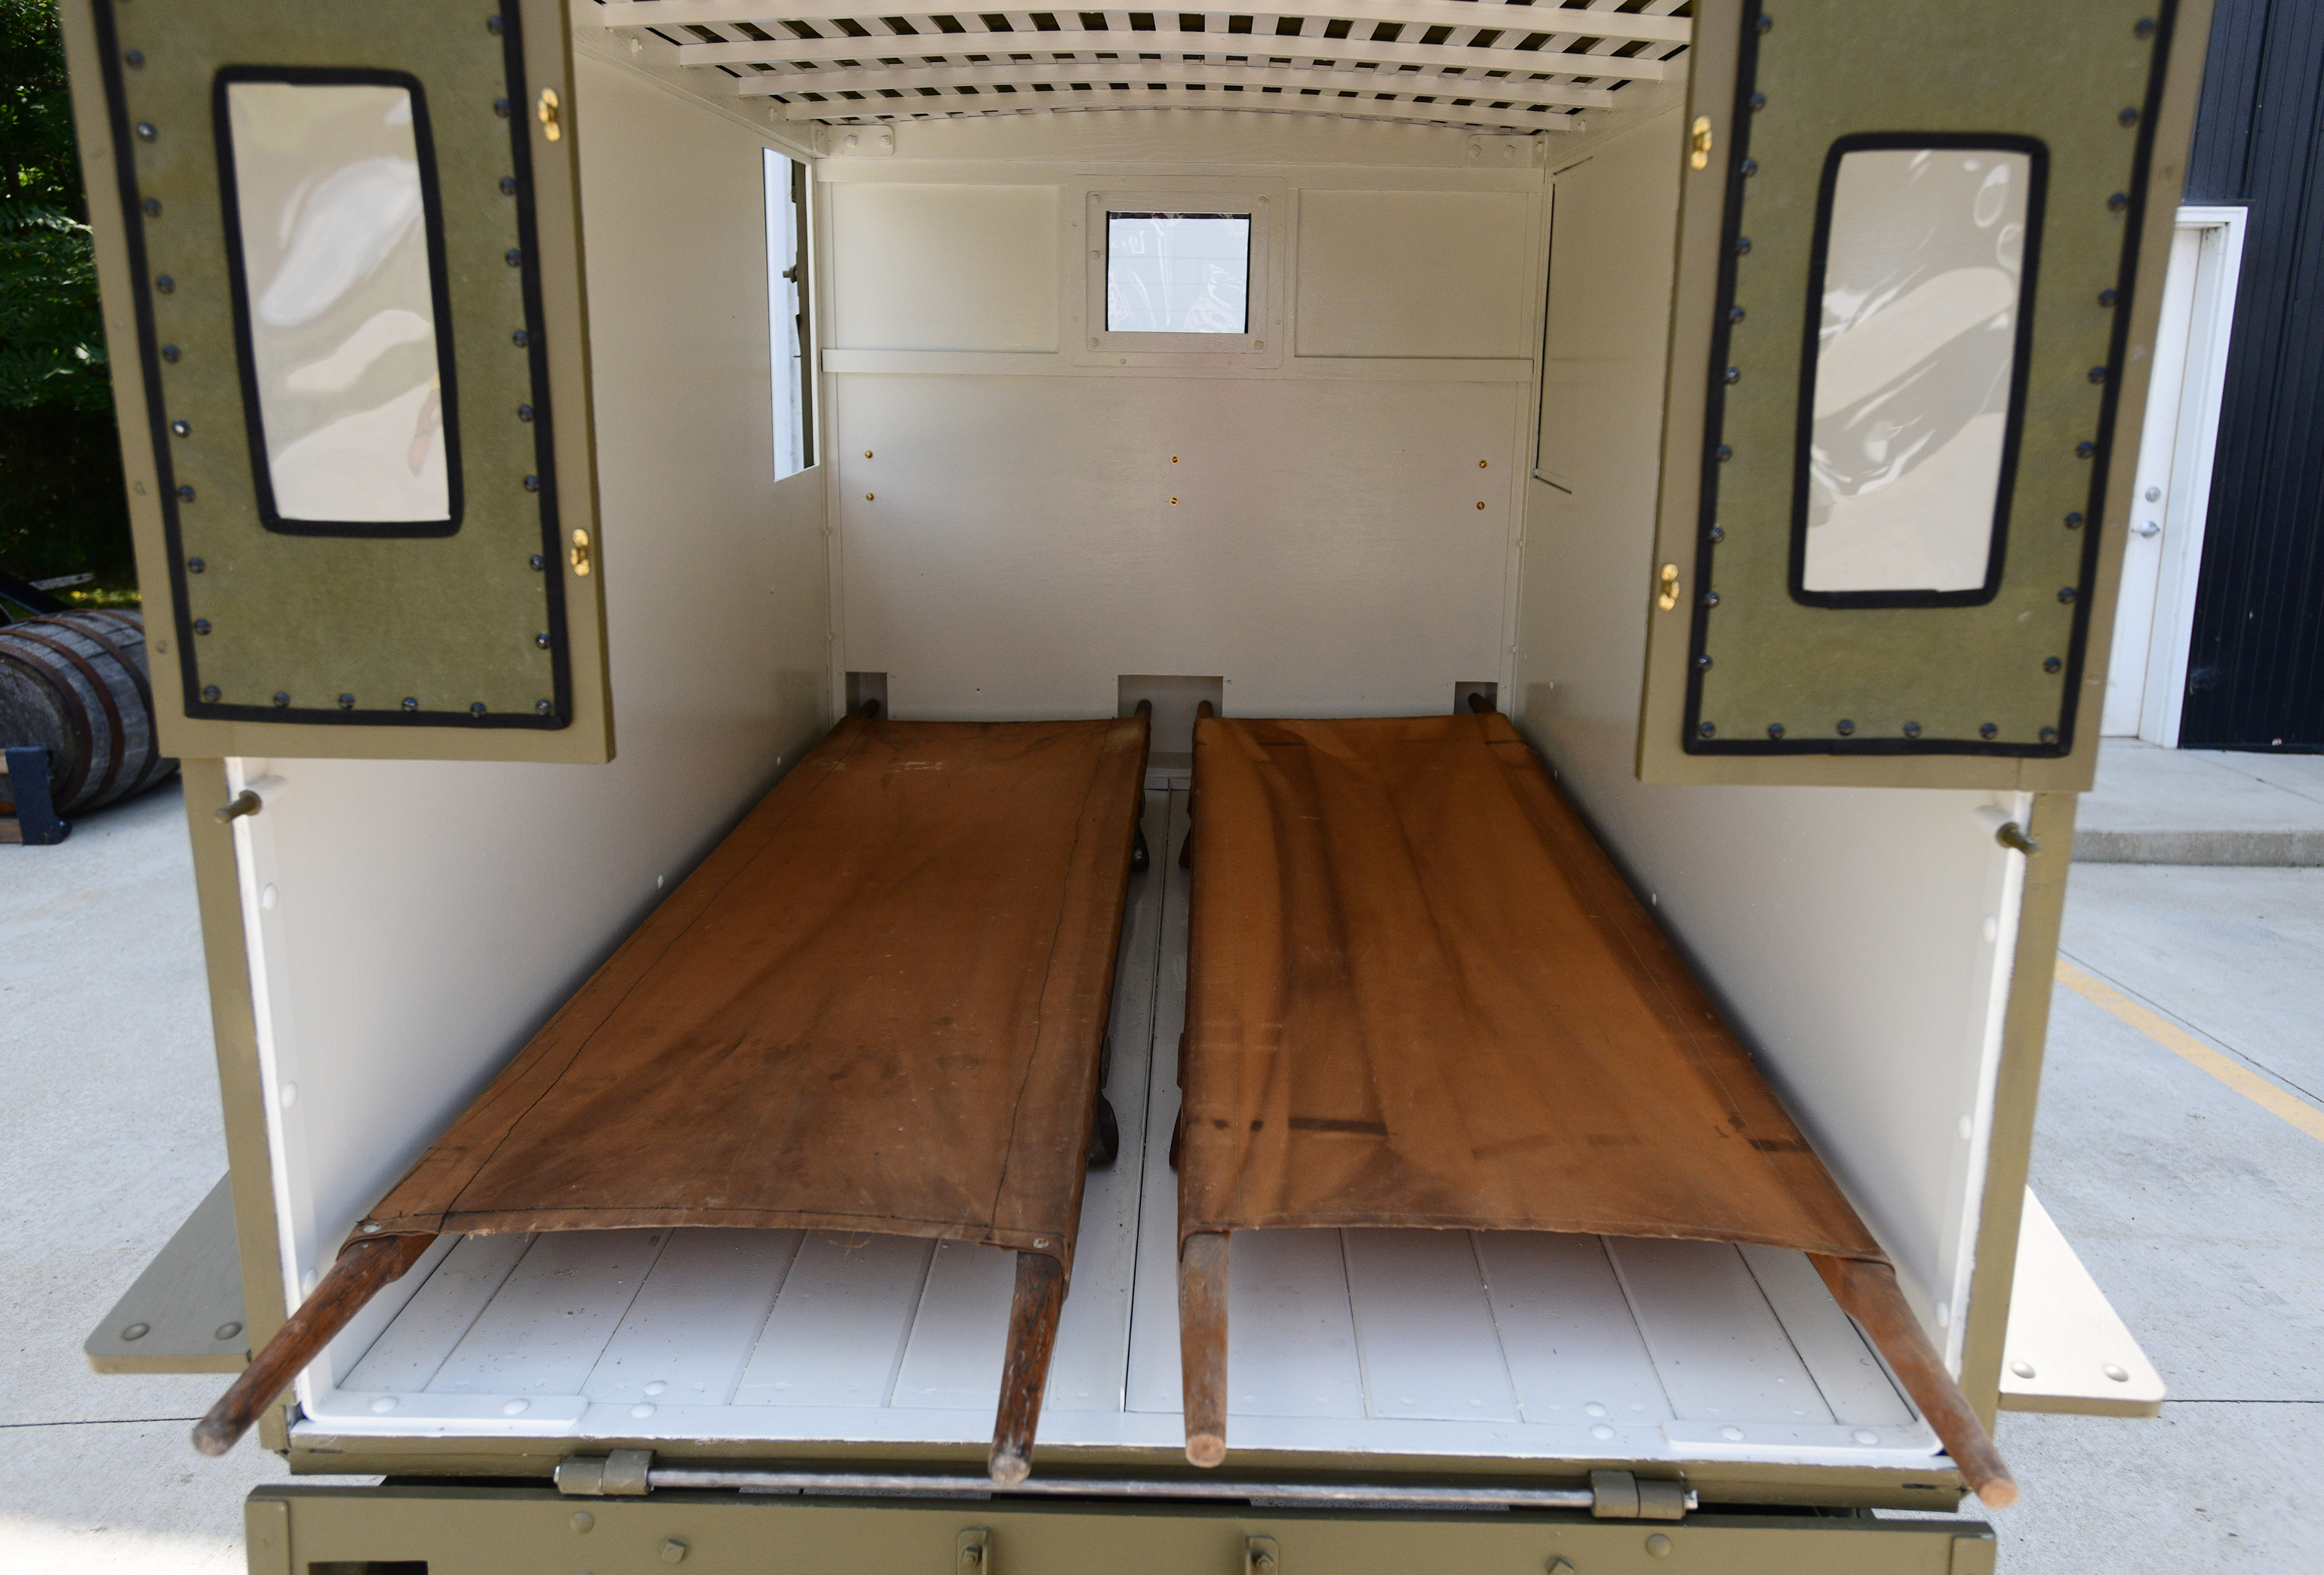 The Michigan Military Heritage Museum converted a 1917 Ford Model T to a World War I era ambulance. The ambulance was on display at the Grass Lake museum on Thursday, Aug. 27, 2020. It took three years for the restoration to complete. Here is a view of the back with stretchers.